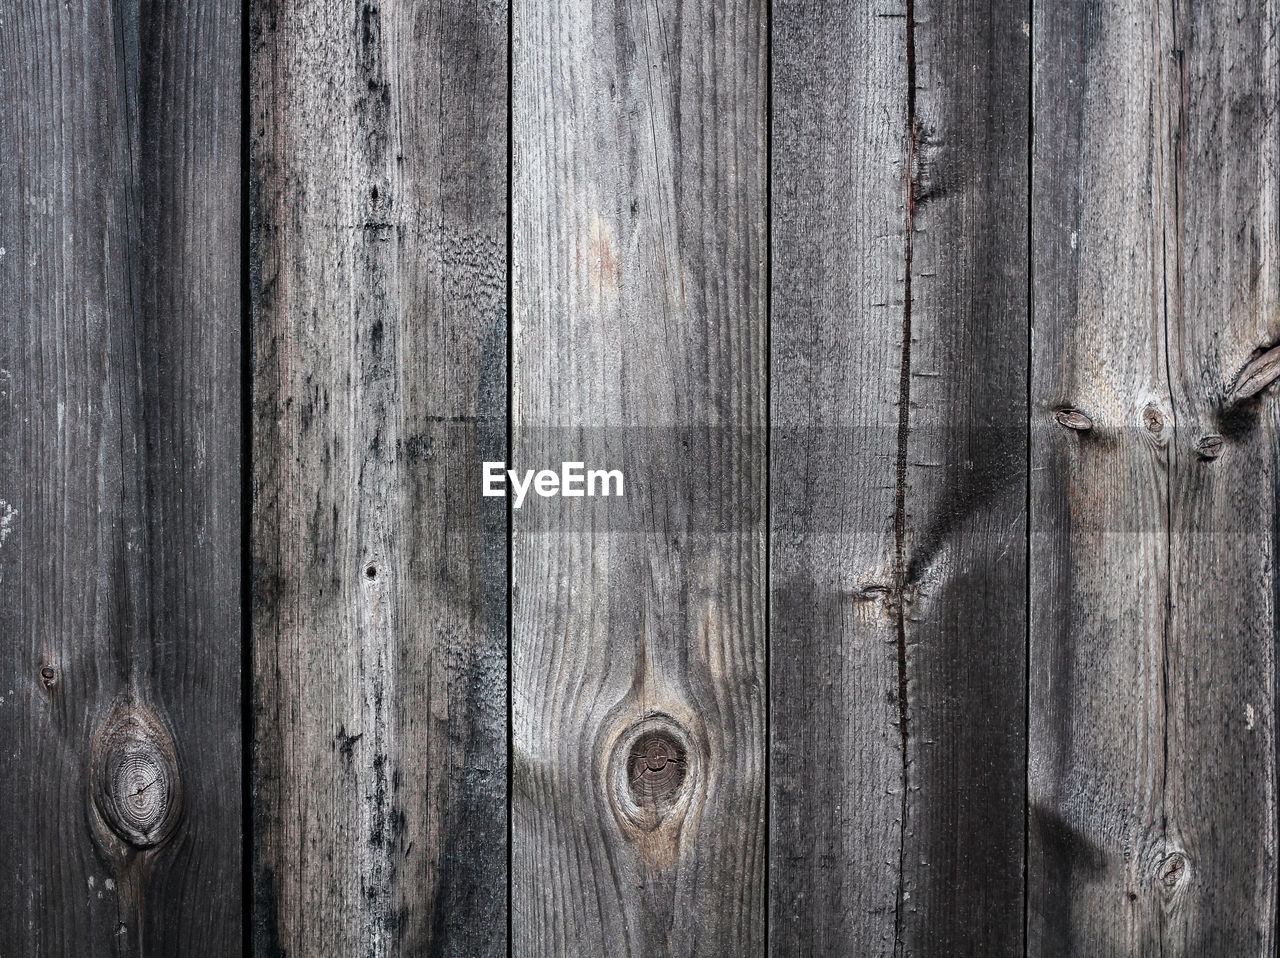 FULL FRAME SHOT OF WEATHERED WOODEN WALL